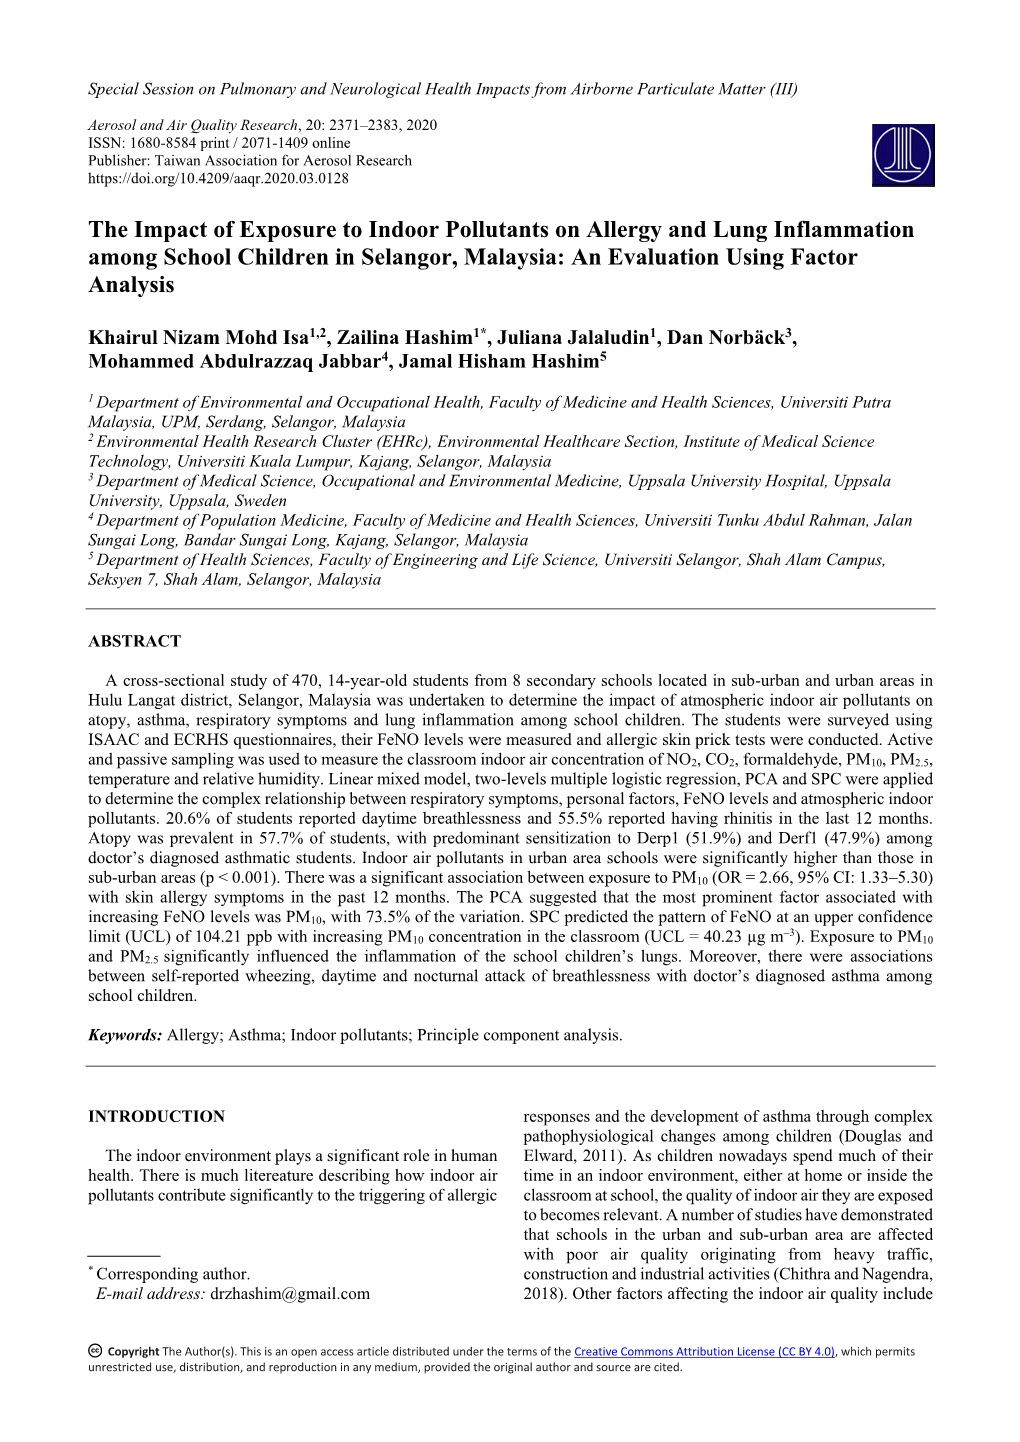 The Impact of Exposure to Indoor Pollutants on Allergy and Lung Inflammation Among School Children in Selangor, Malaysia: an Evaluation Using Factor Analysis